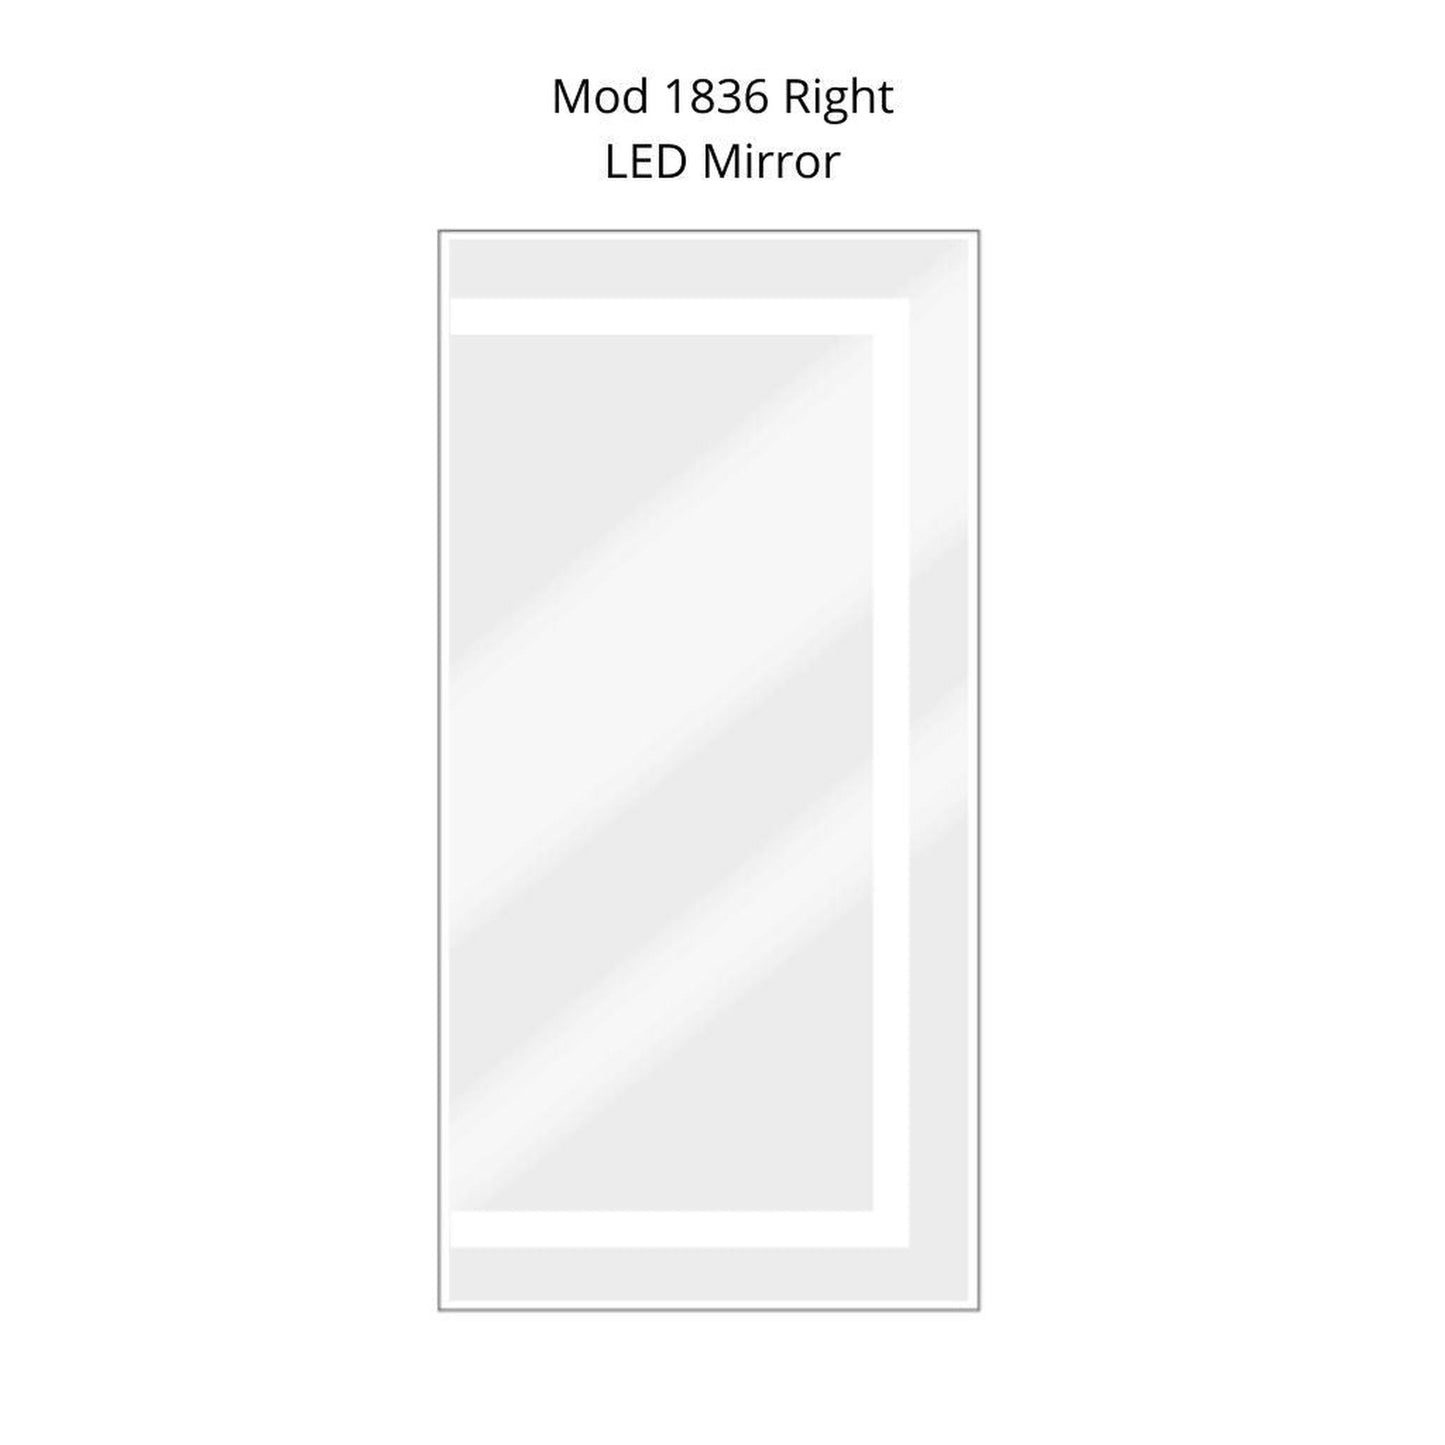 Krugg Reflections Mod 18" x 36" 5000K Rectangular Right Configuration Wall-Mounted Silver-Backed LED Bathroom Vanity Mirror With Built-in Defogger and Dimmer